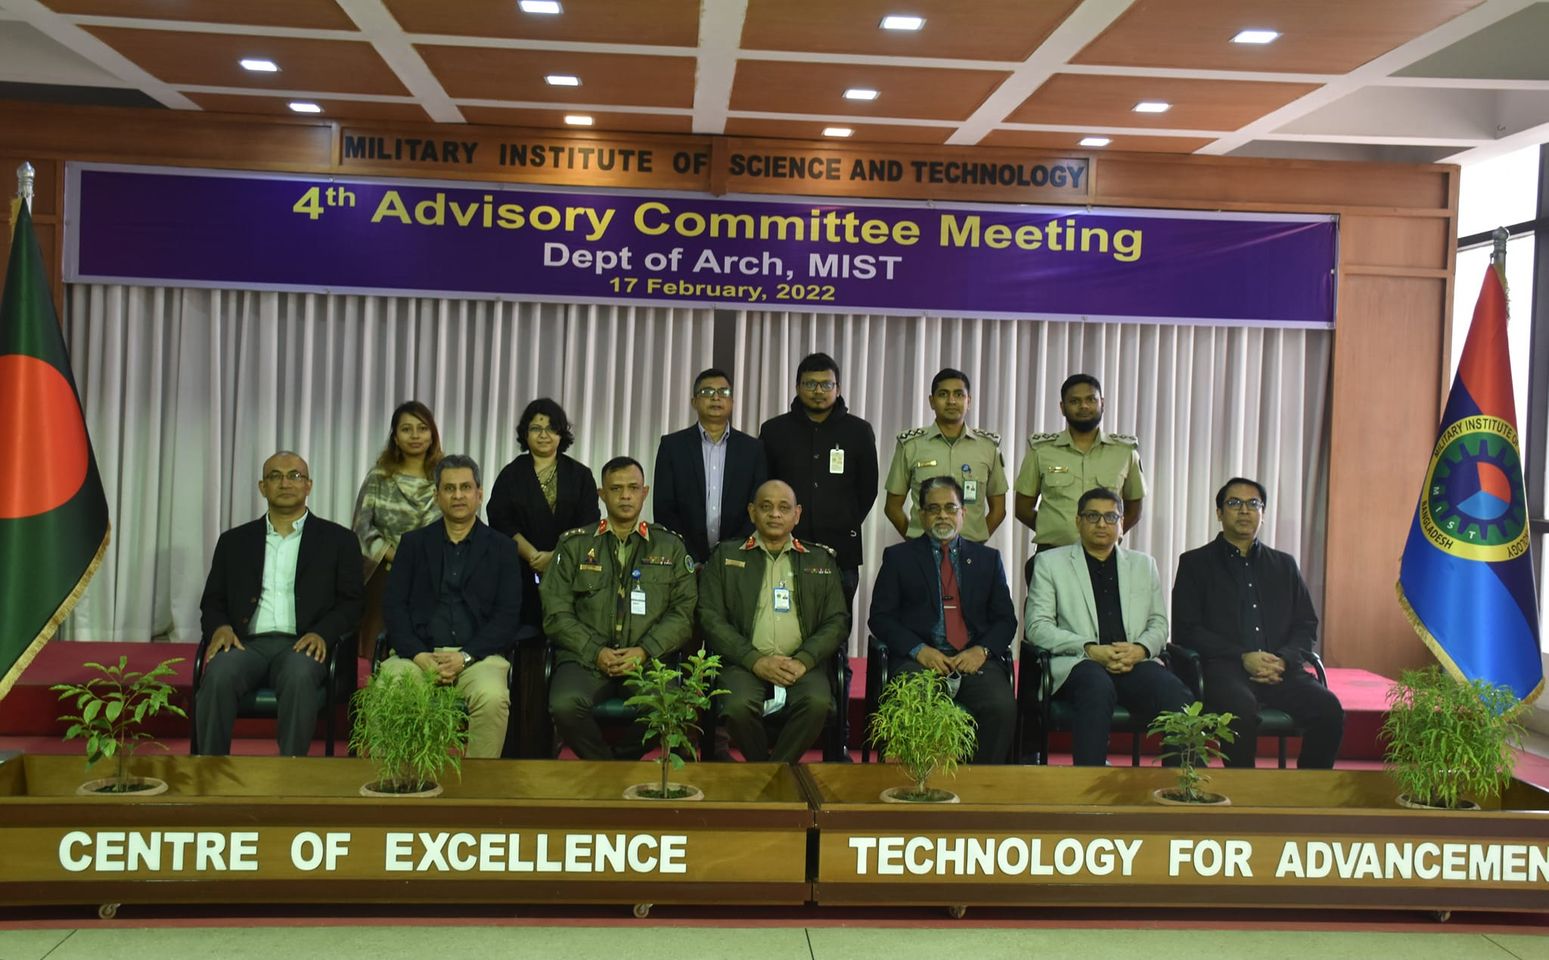 The 4th Advisory Committee Meeting of the Architecture Department of MIST